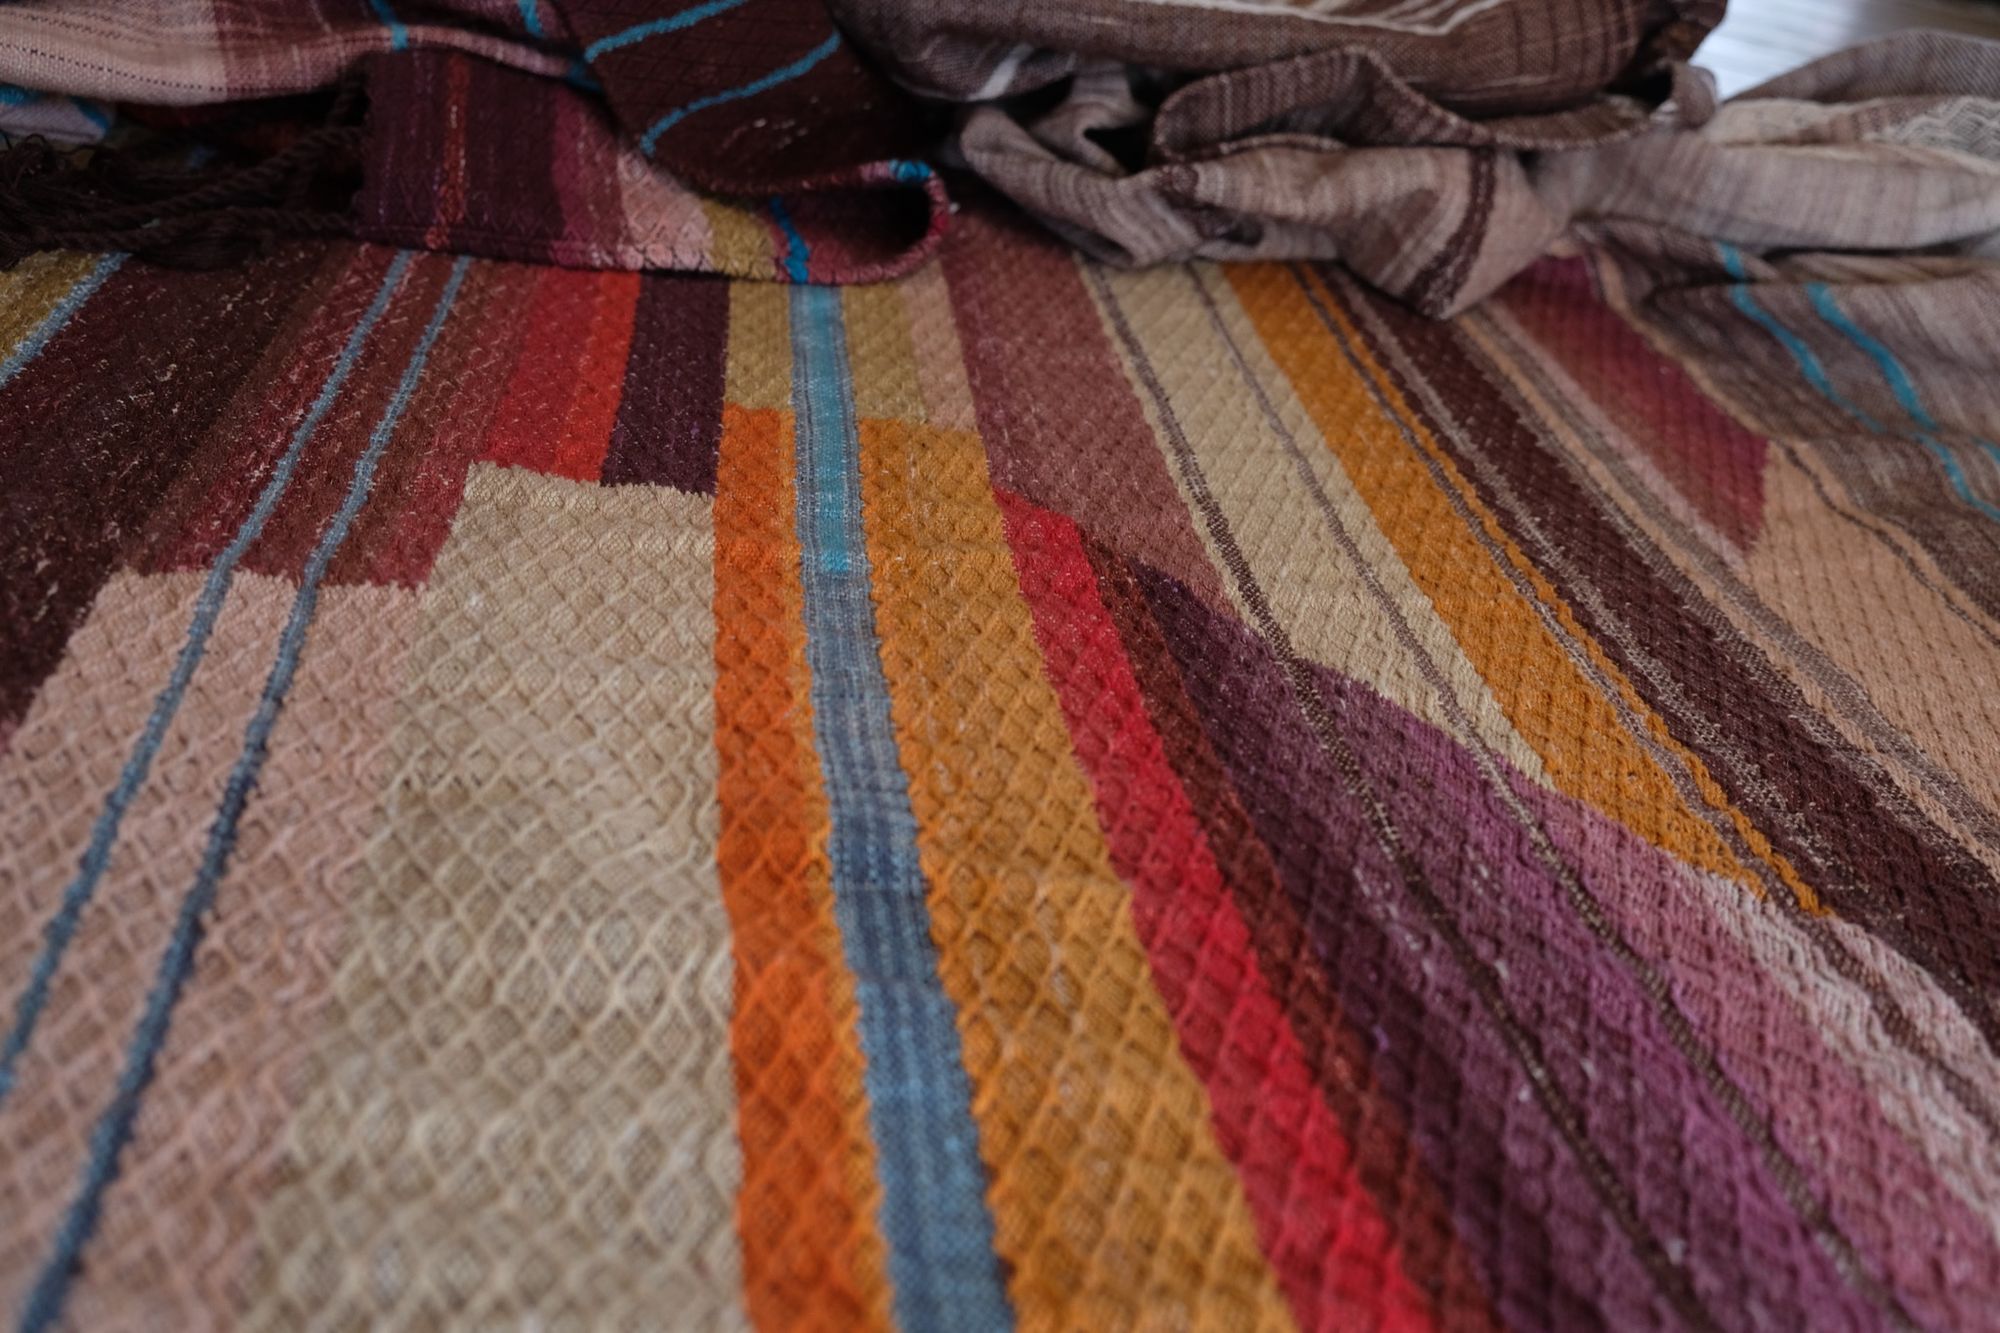 Detail of Handwoven fabric with a diamond texture pattern in natural browns, grey, purples, reds, turquoise, yellow, orange and pink.